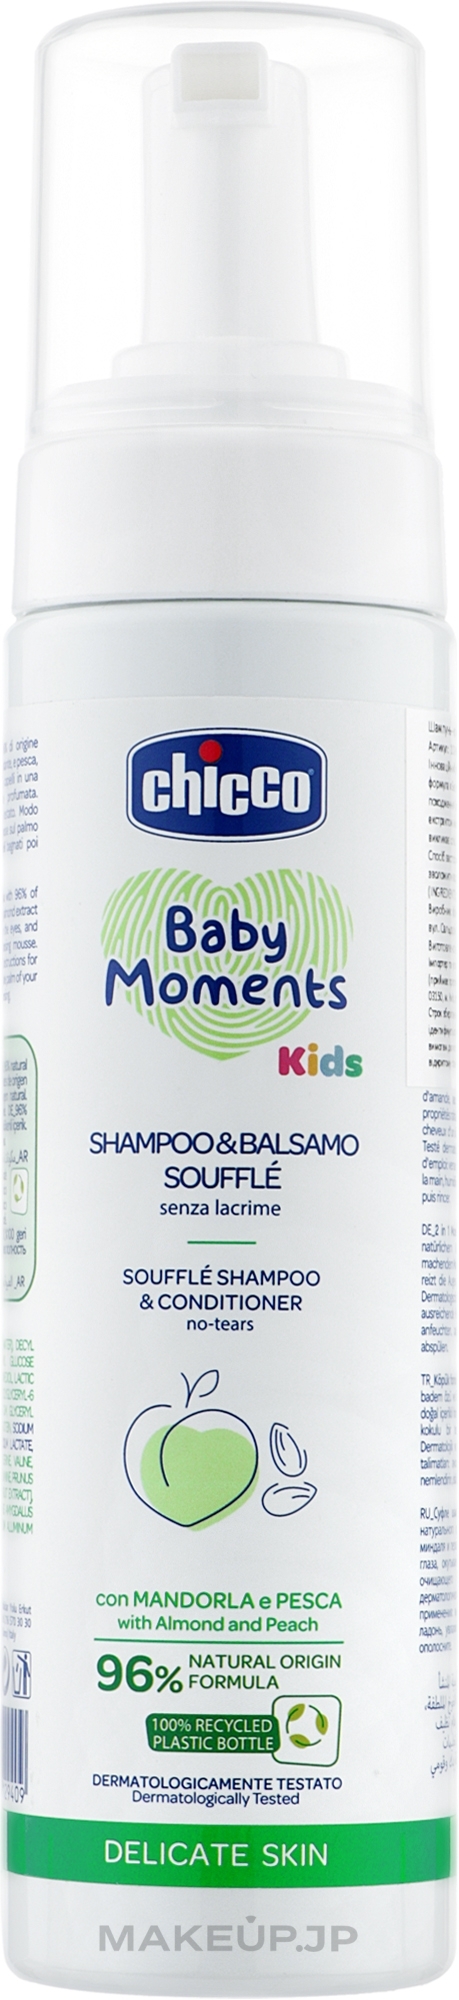 2in1 Foam Shampoo & Conditioner "No Tears" - Chicco Baby Moments Kids — photo 150 ml